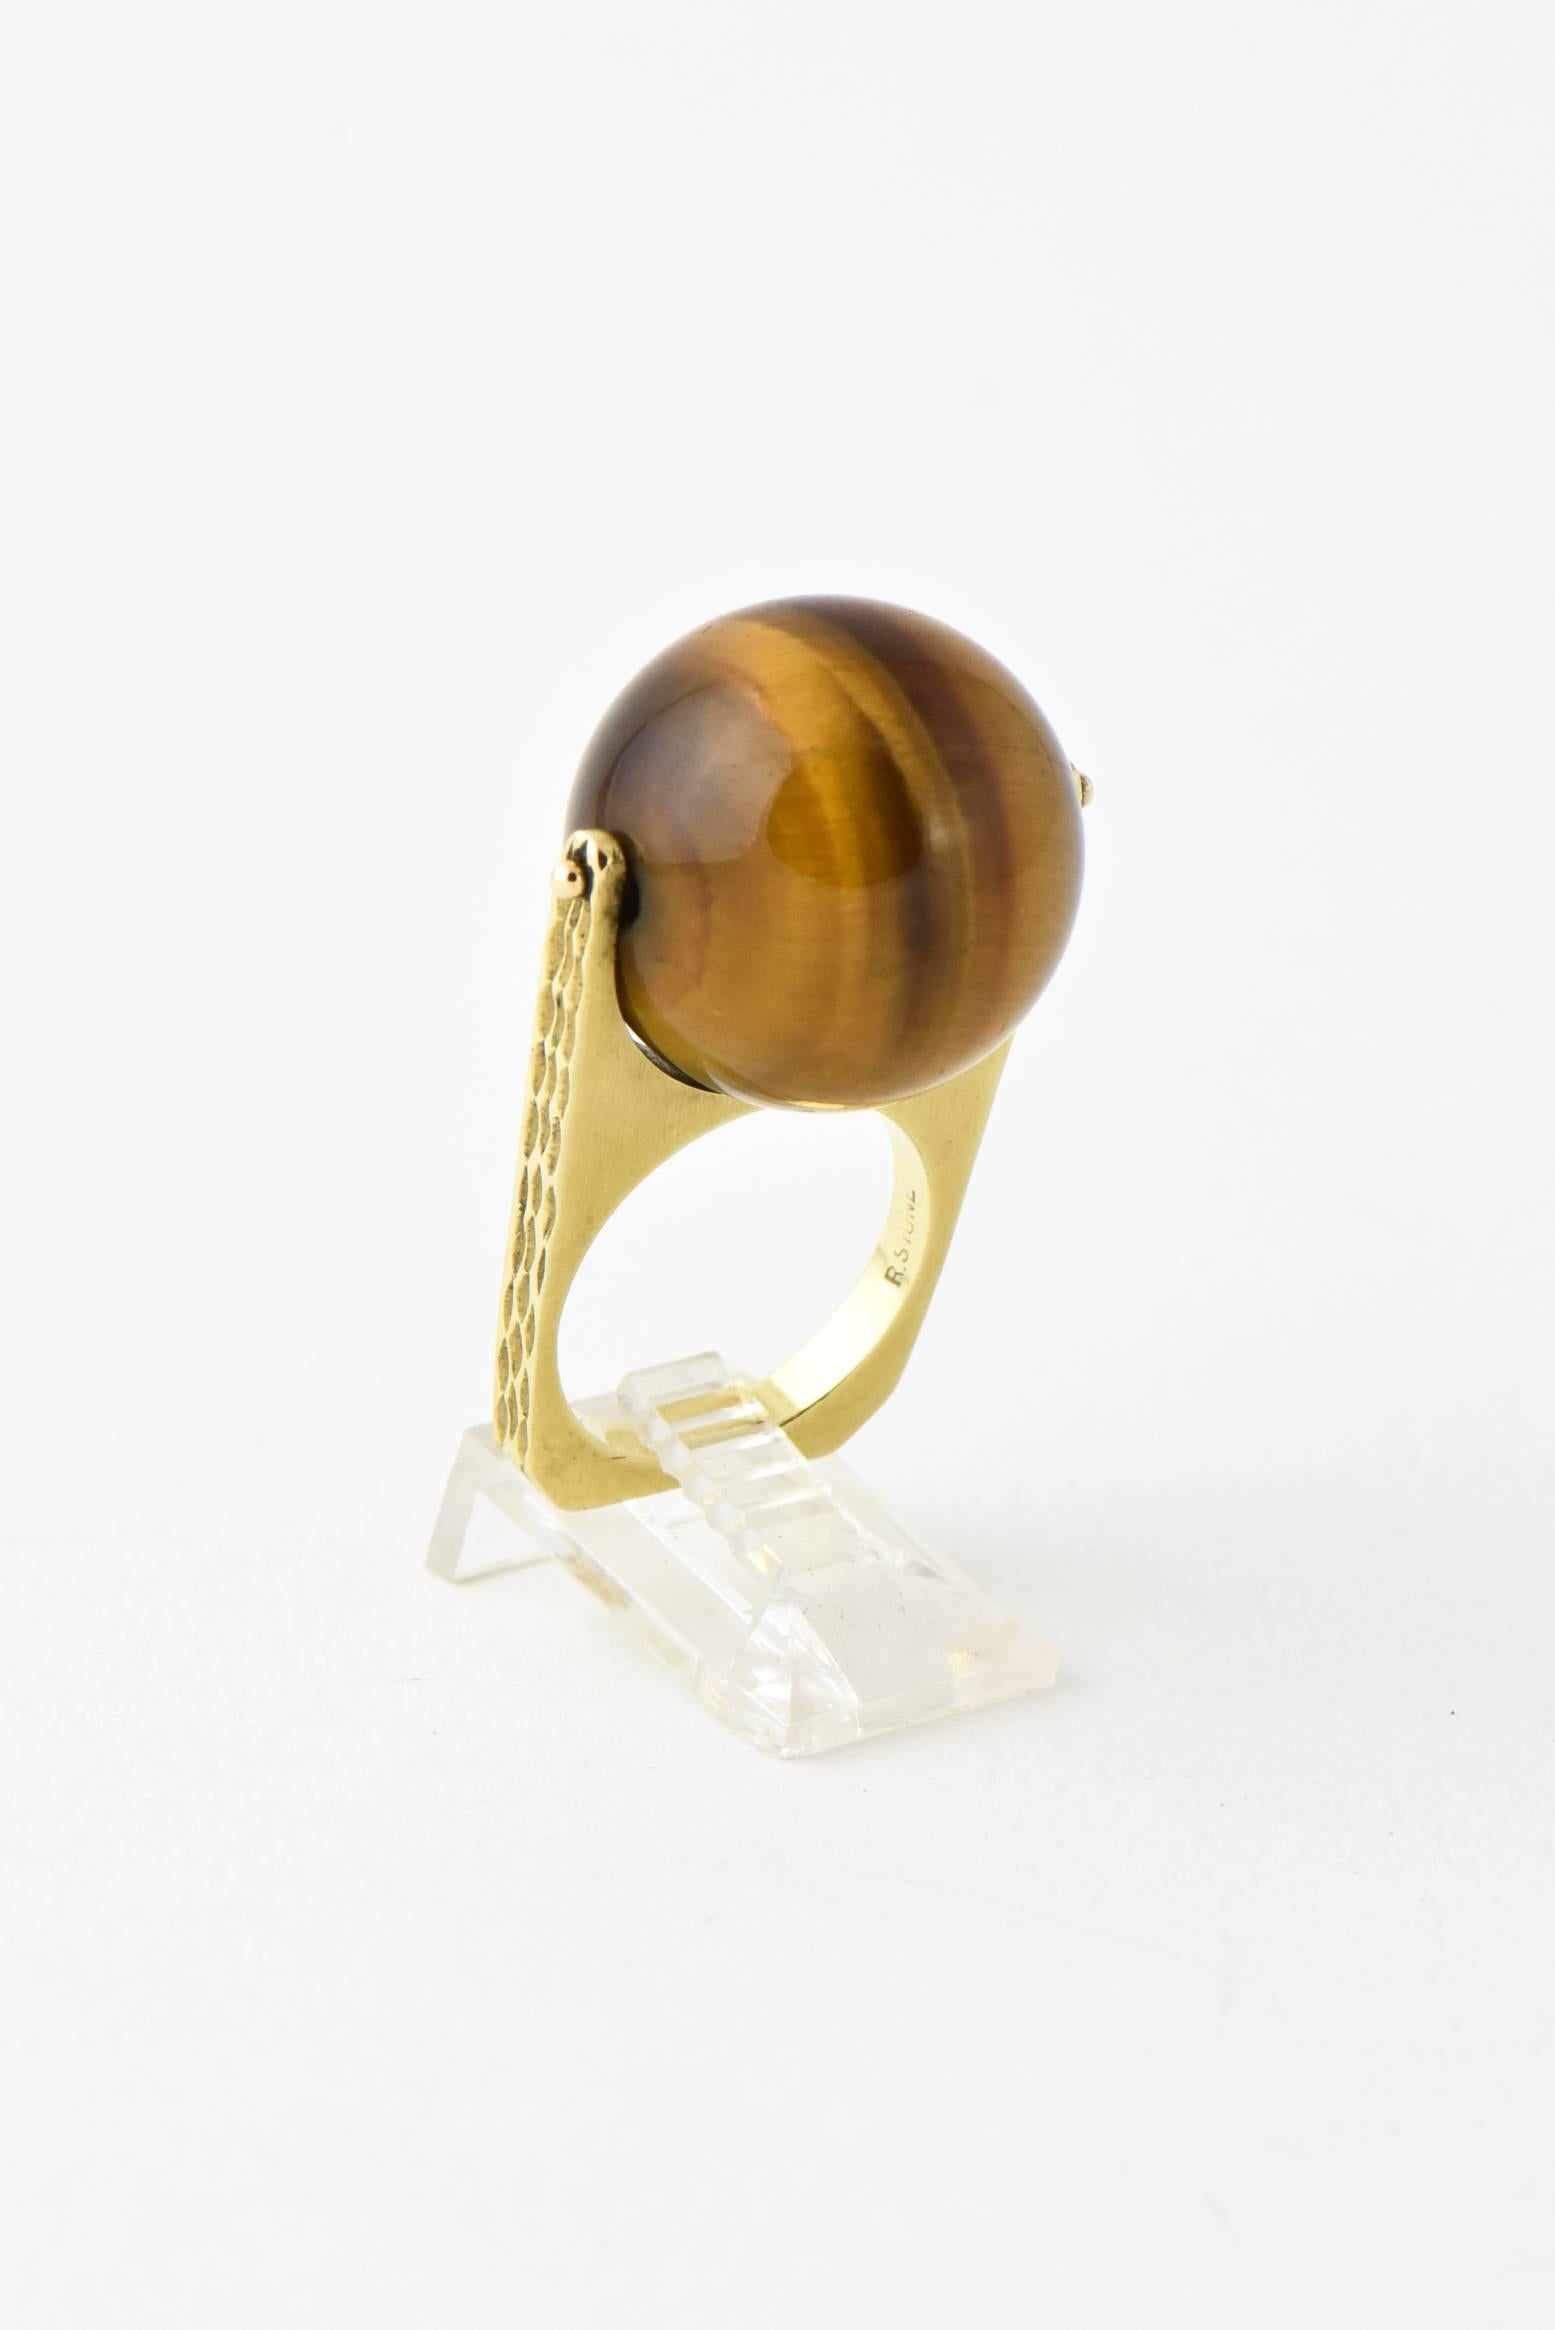 Cool 1960's Ball Ring featuring a 18k yellow gold rectangular ring with bark finish sides holding a large 20mm tiger's eye ball that spins by New York jeweler, R. Stone. 

US size 6.25 

Marked 18k R. Stone

